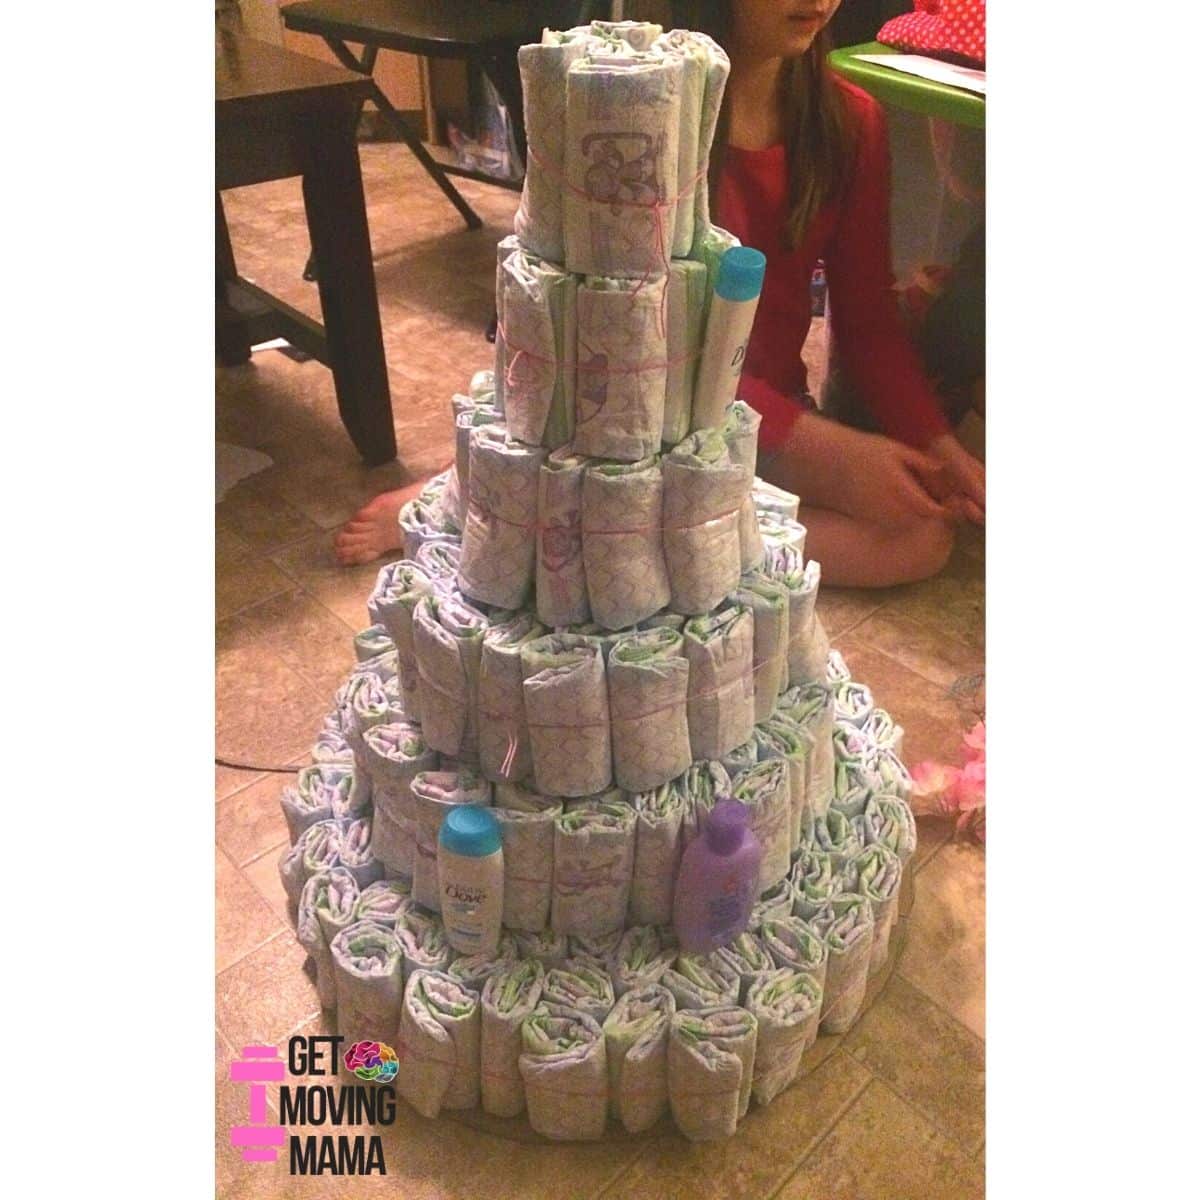 A picture of a diaper cake with a few baby travel sized toiletries added.